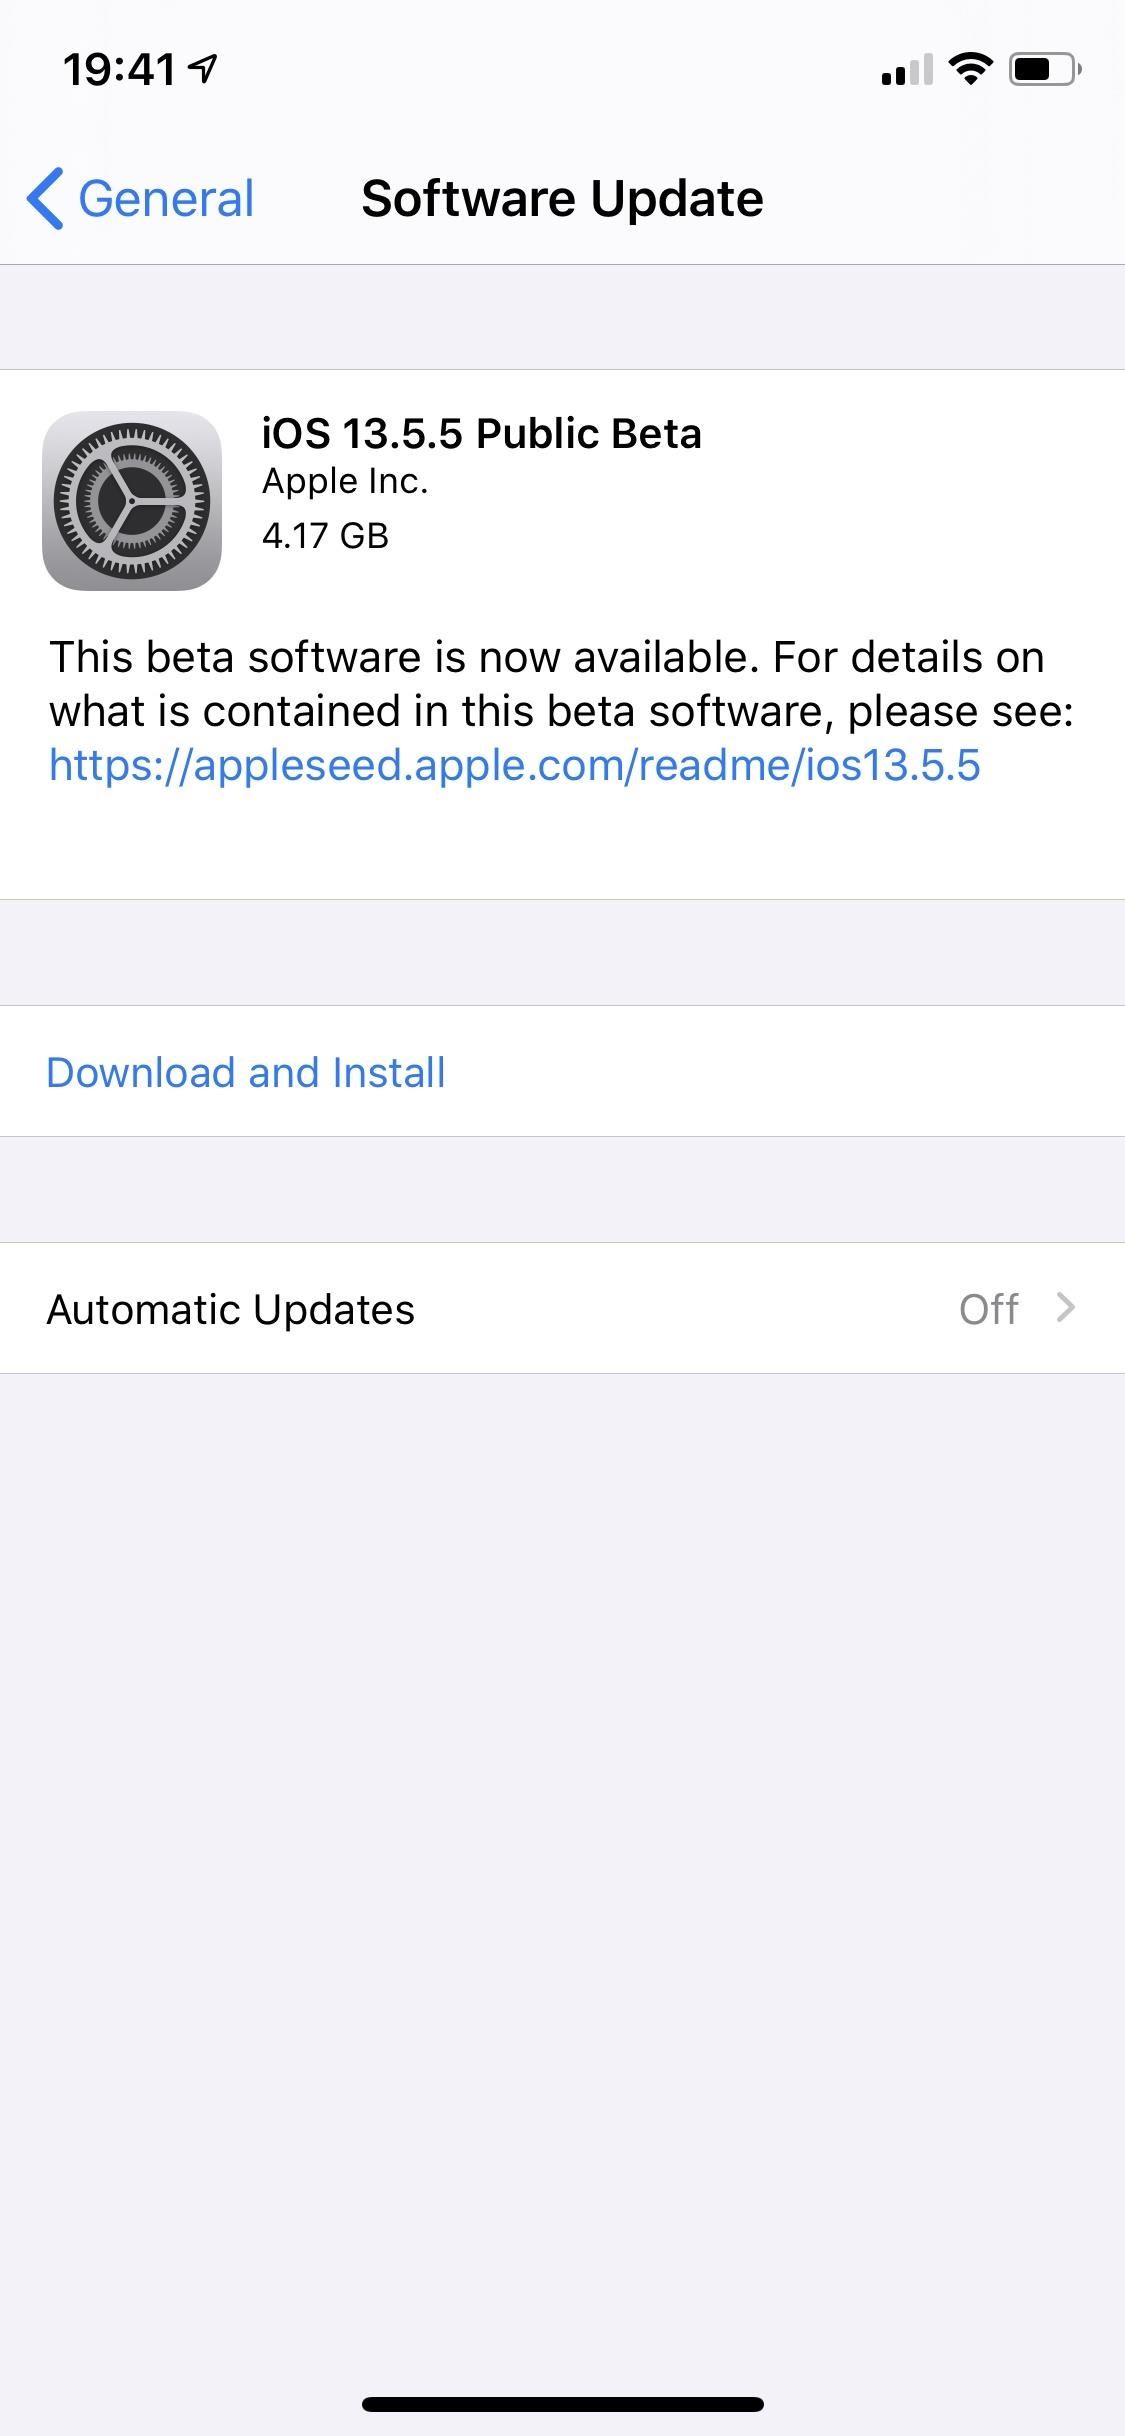 Apple's iOS 13.5.5 Public Beta 1 for iPhone Includes Evidence of Audio Support for Apple News+